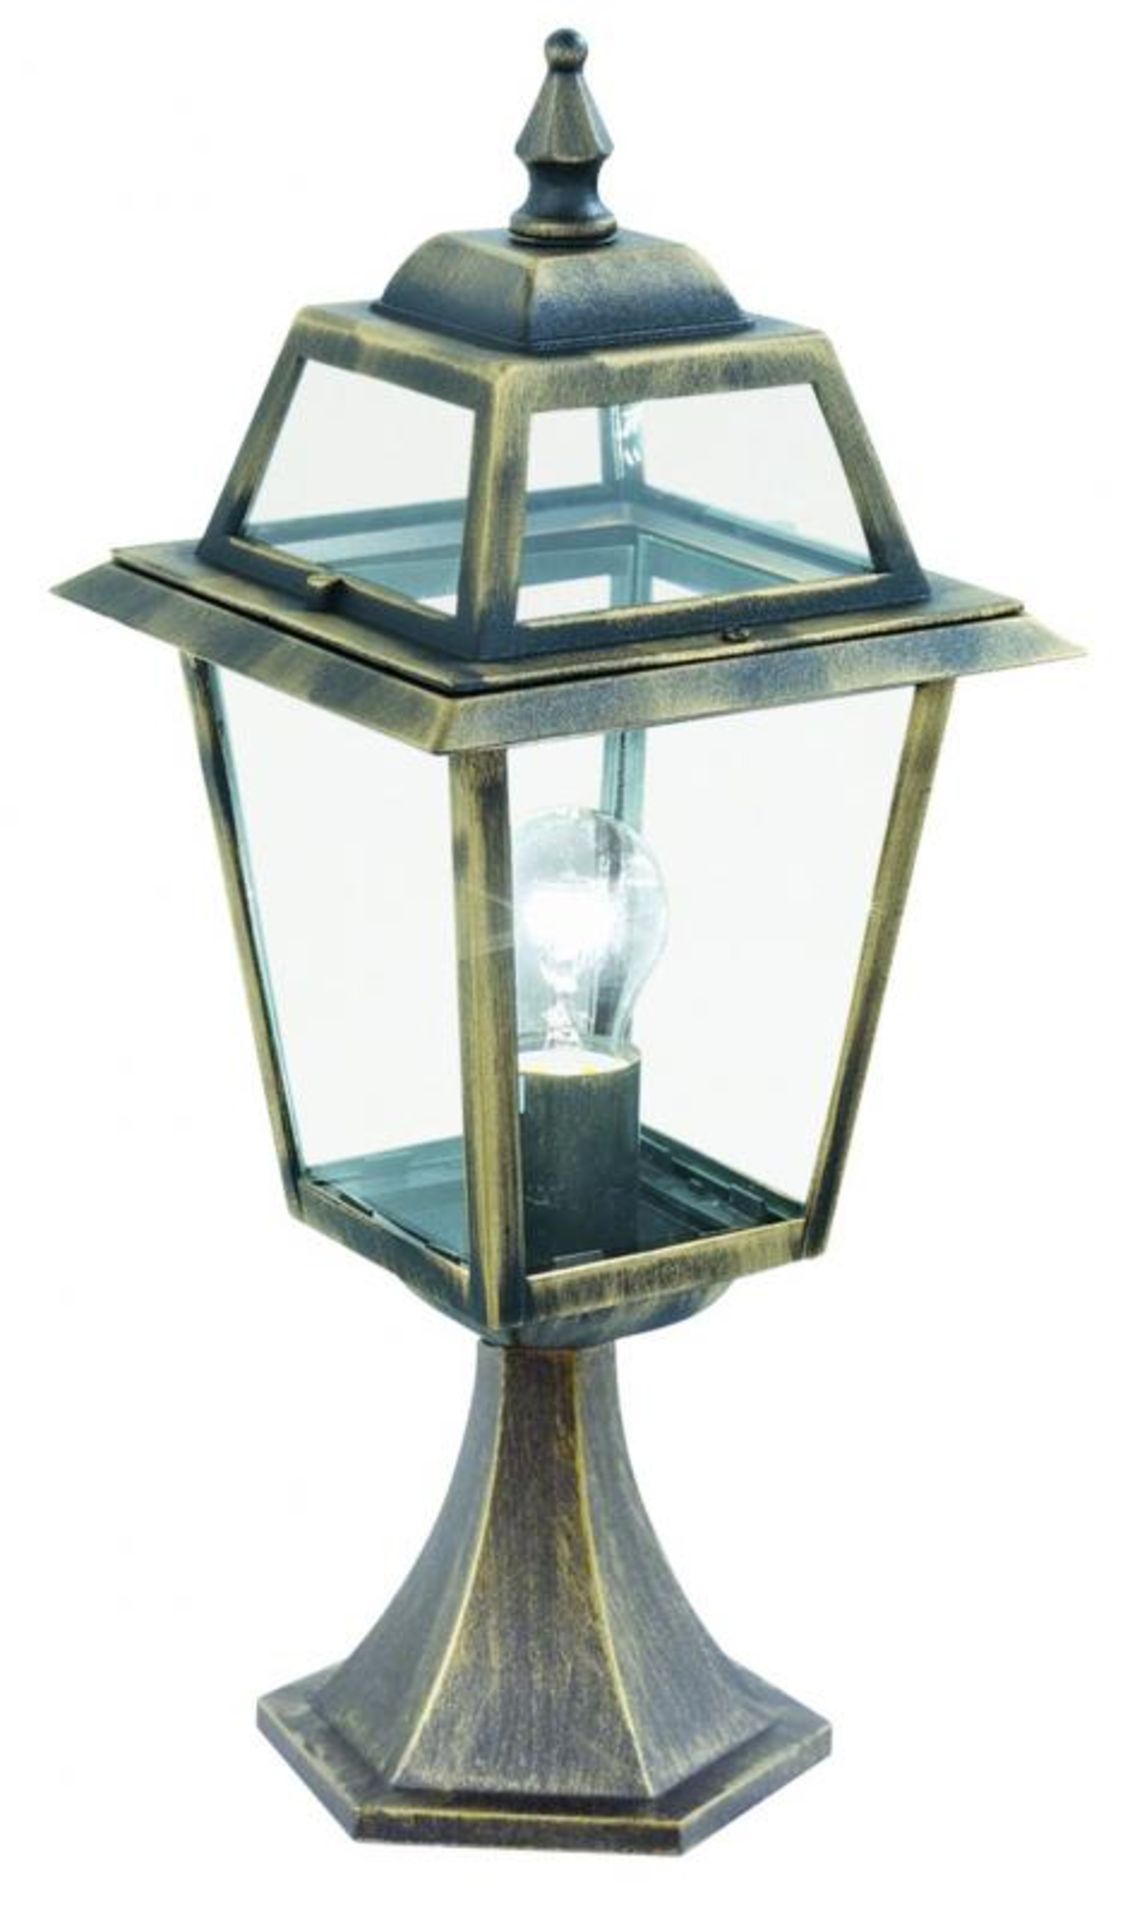 1 x New Orleans Aluminium IP44 Outdoor Post Lamp - Black and Gold Finish With Clear Glass - New Boxe